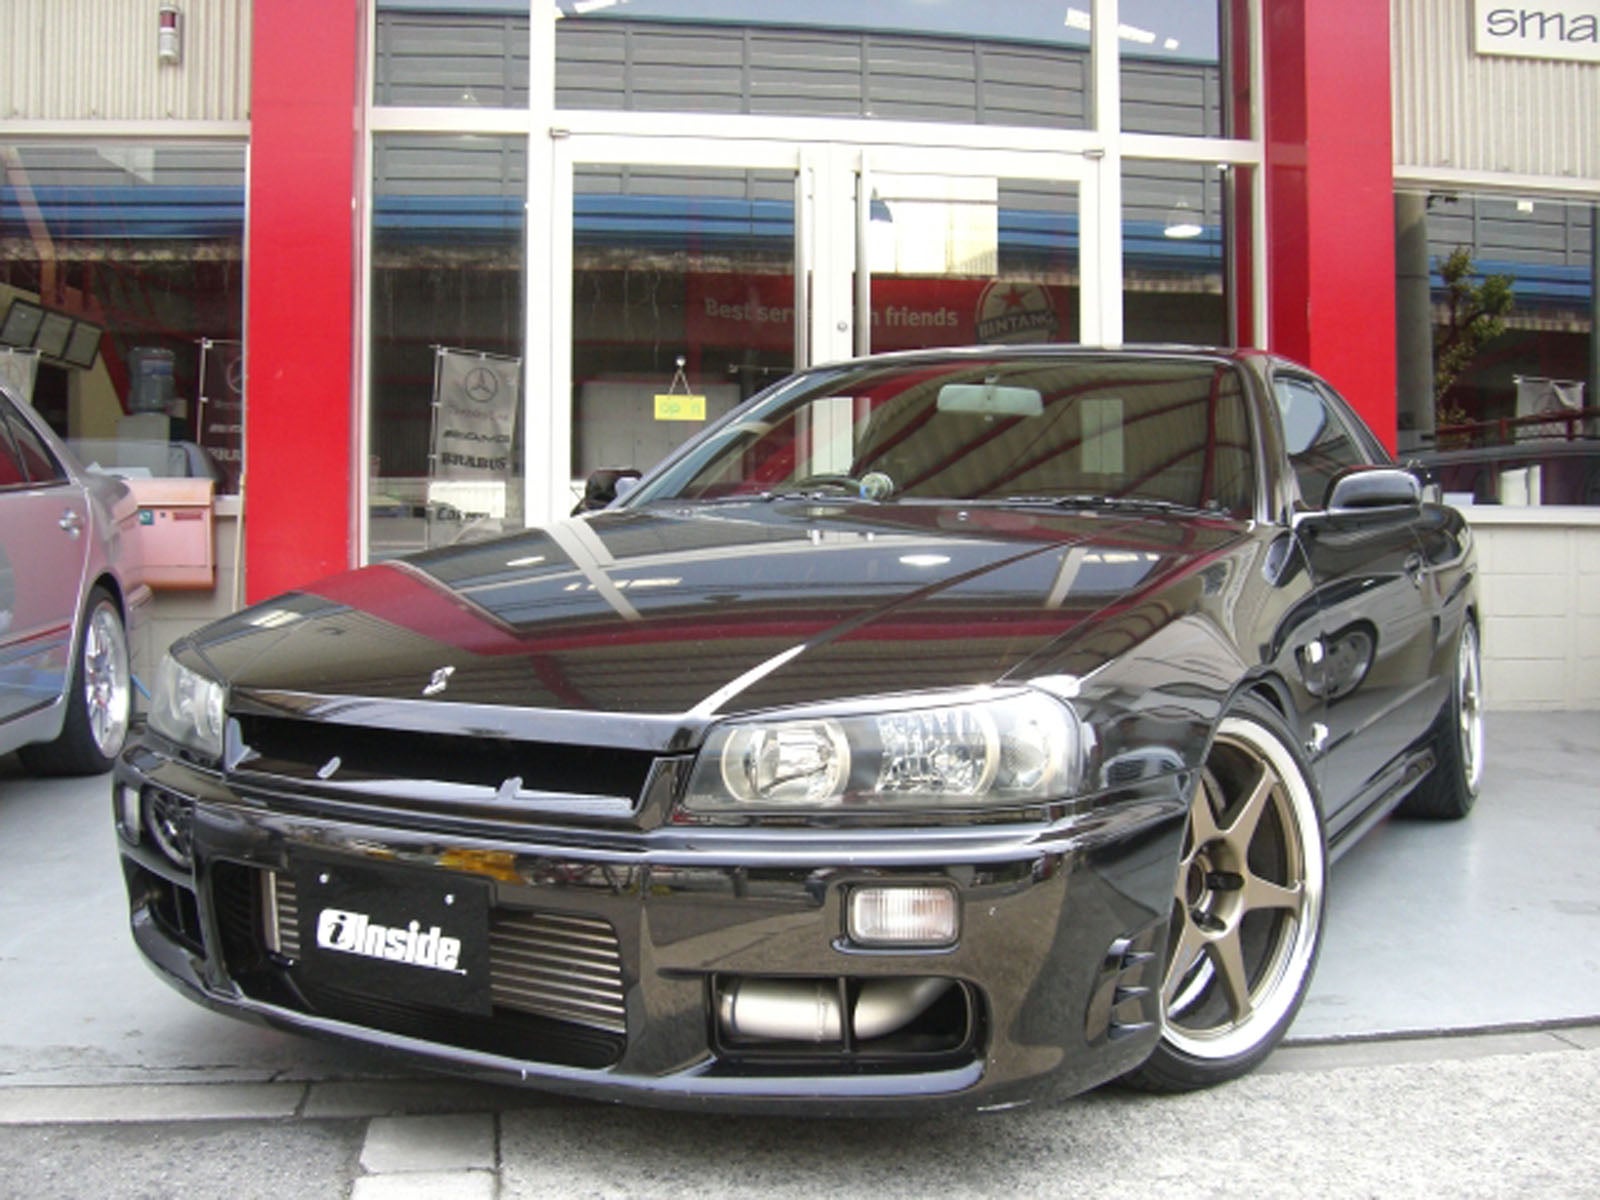 Nissan skyline r34 for sale in miami #3